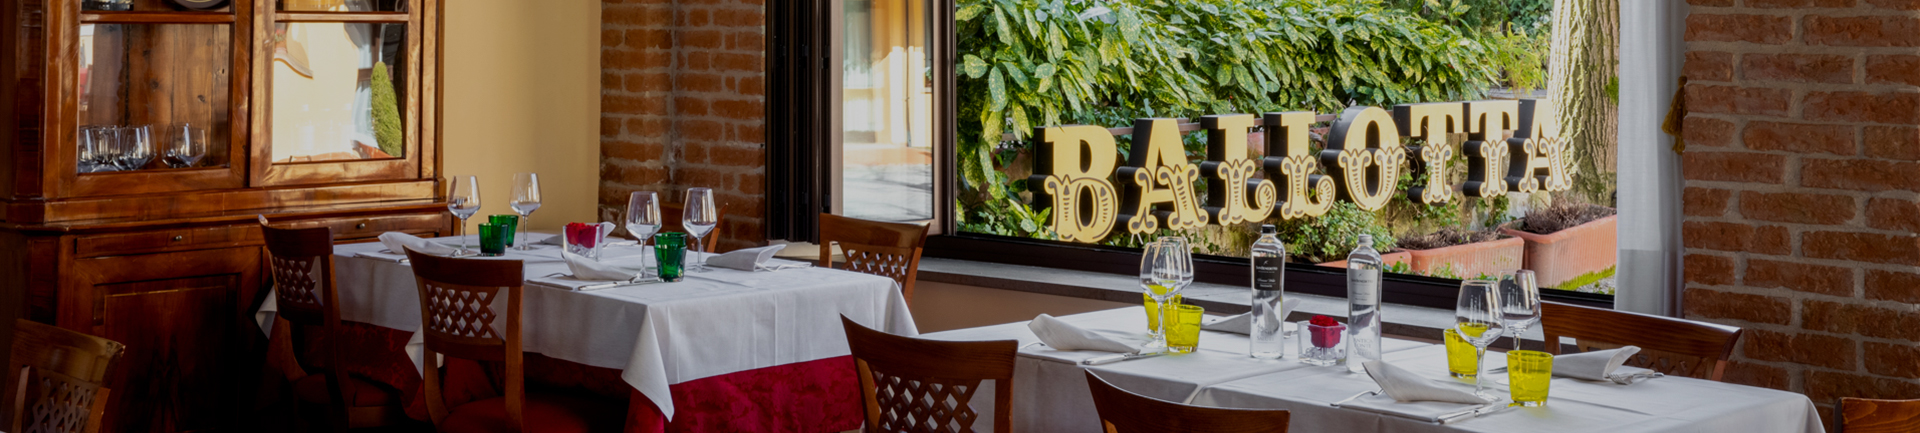 Antica Trattoria Ballotta,  a  restaurant where you can rediscover the flavors  of the Venetian tradition